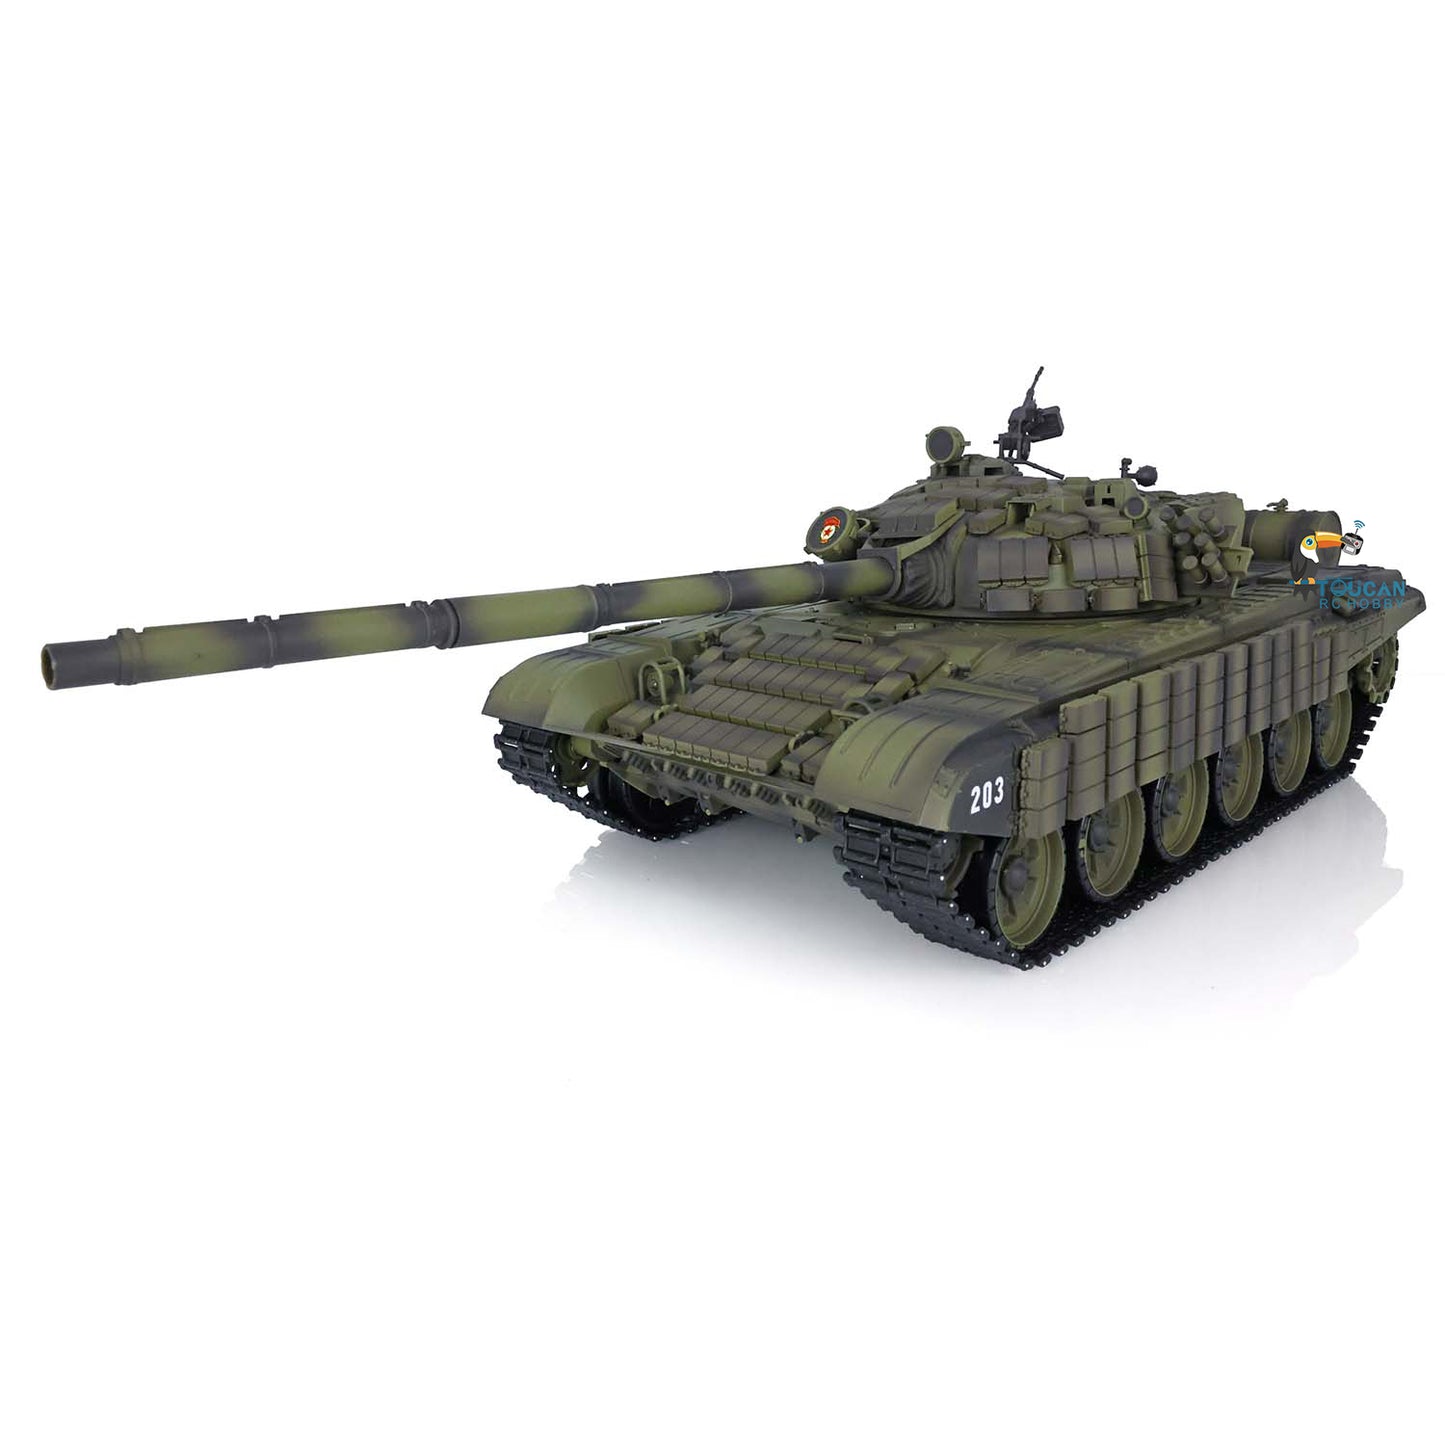 US STOCK Heng Long T72 1/16 Scale Remote Controlled Battle Tank 7.0 Mainboard Plastic 3939 Ready To Run BB IR Tank Model Battery